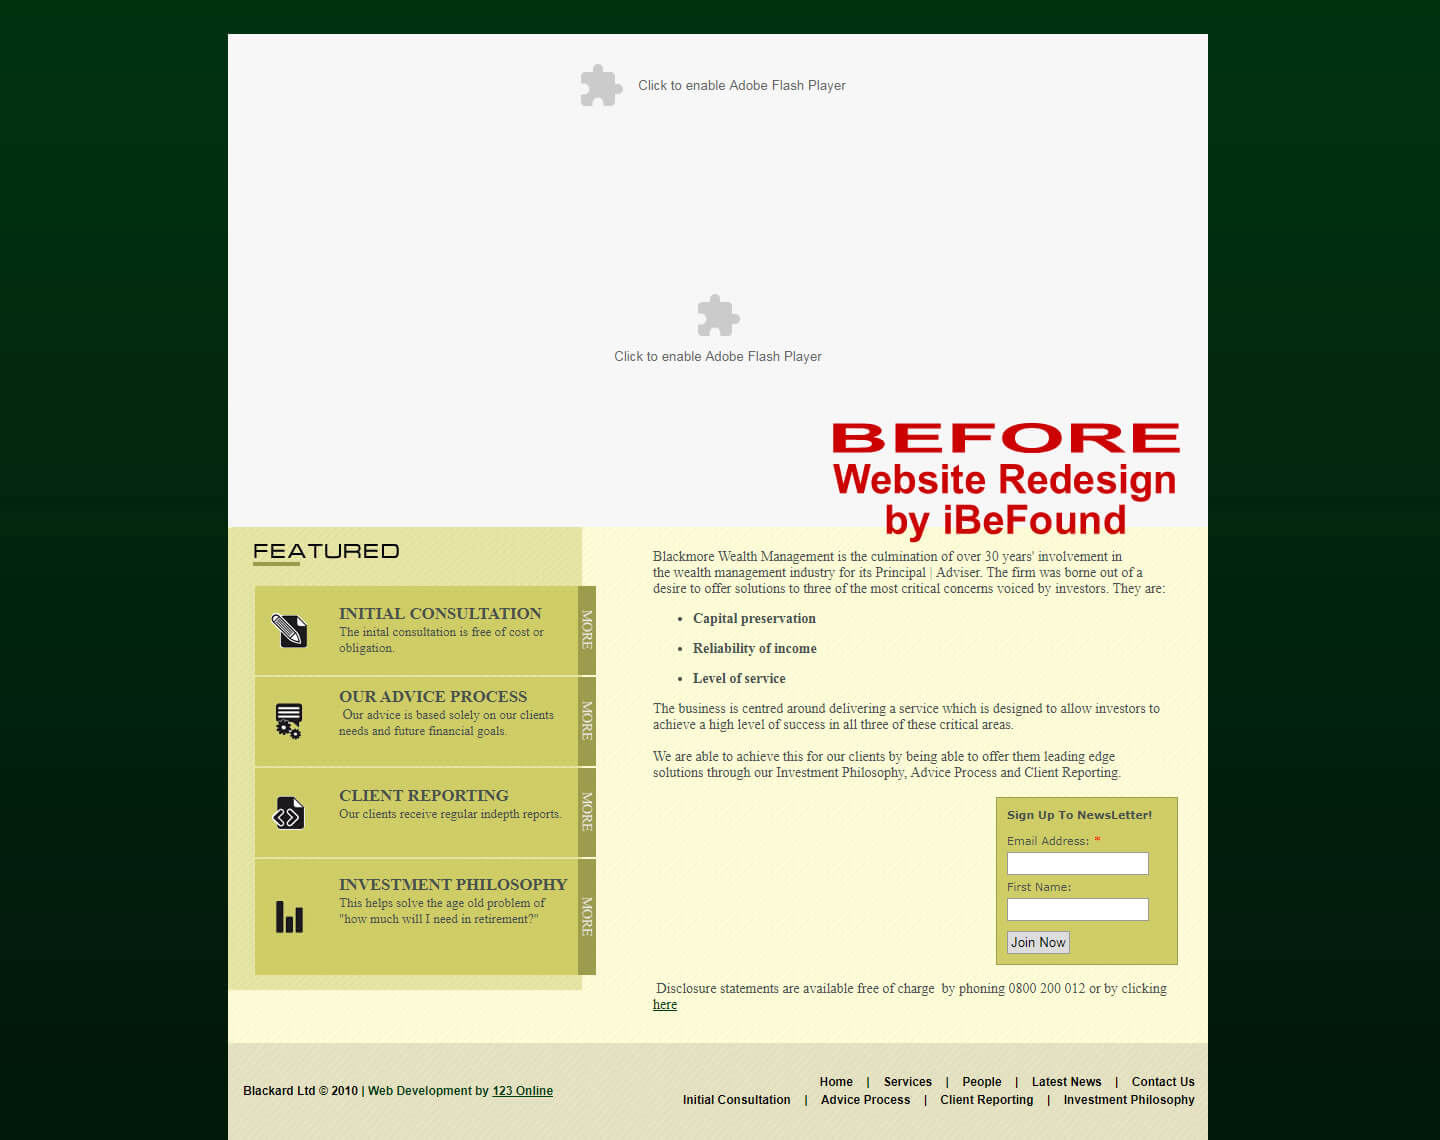 Homepage Of Blackmore Wealth Management Before Website Redesign By IBeFound Digital Marketing